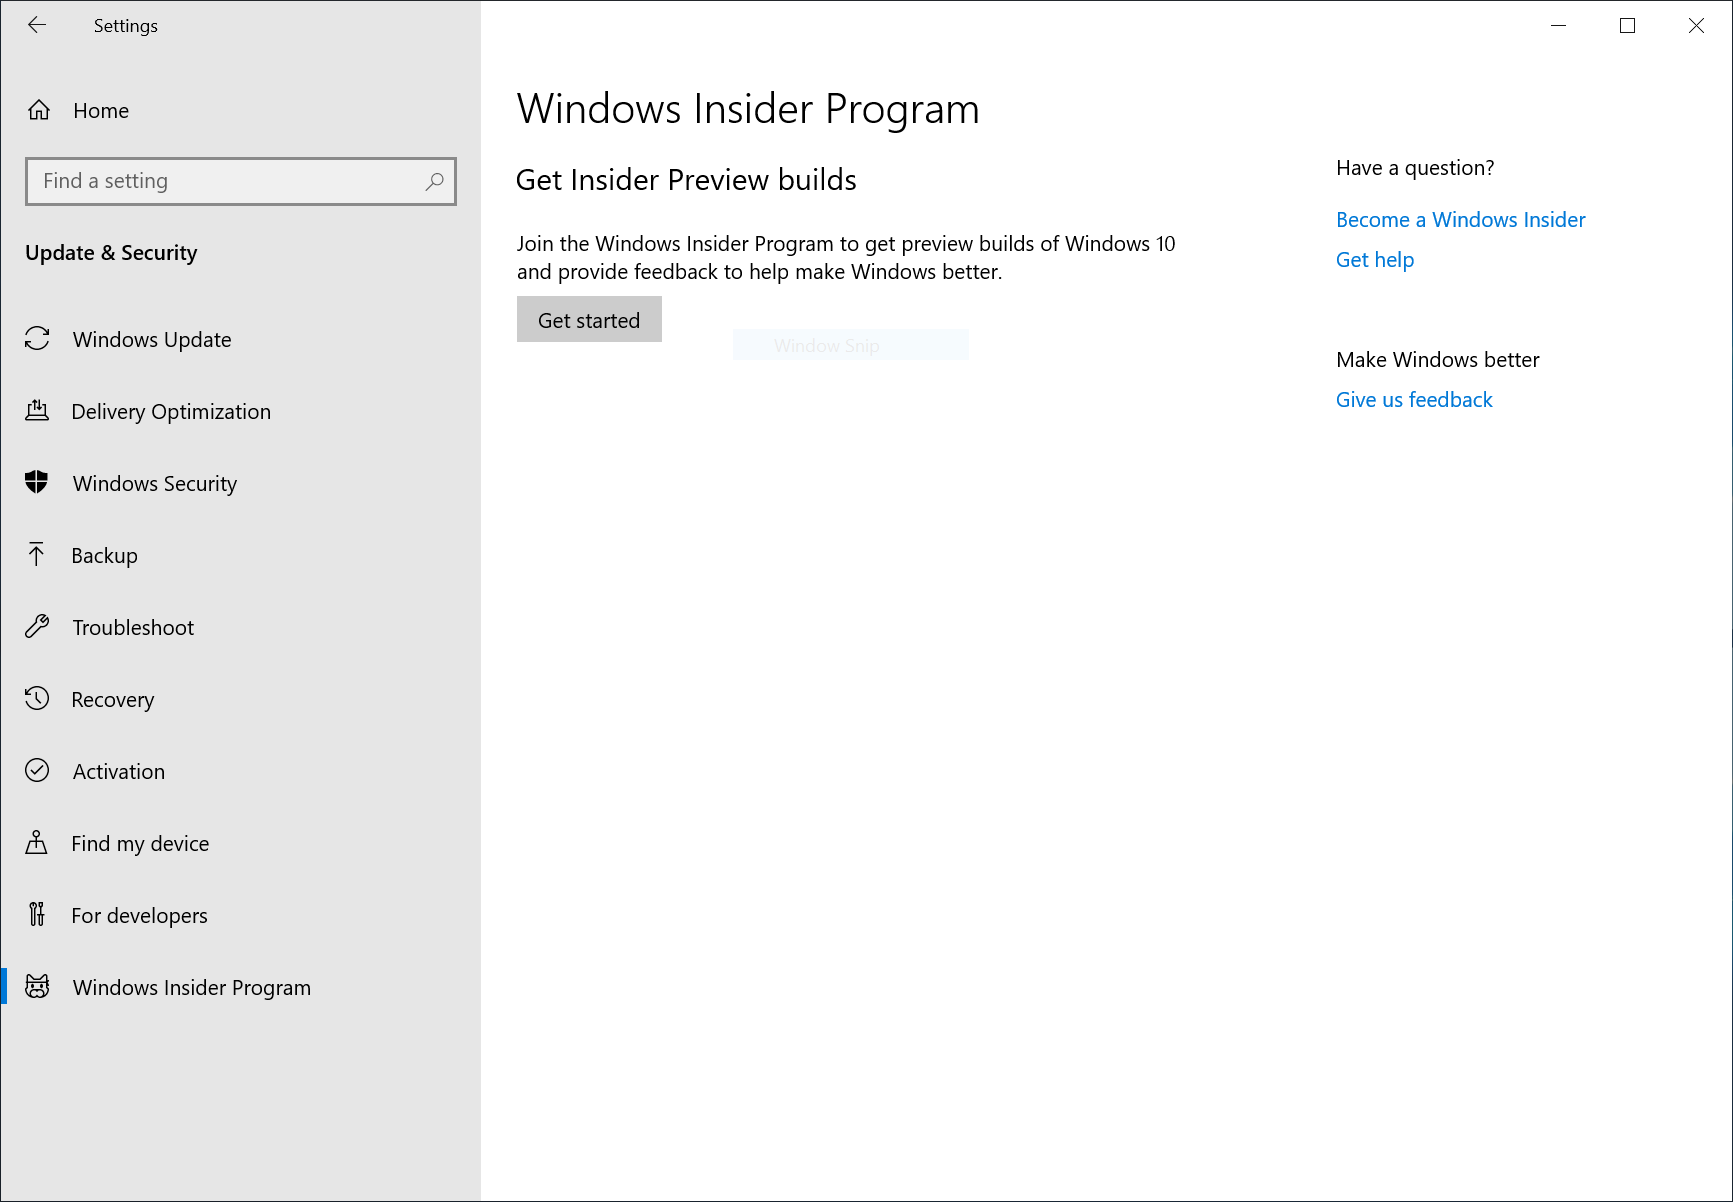 Step 1: Go to Settings > Update & Security > Windows Insider Program and click the “Get started” button.